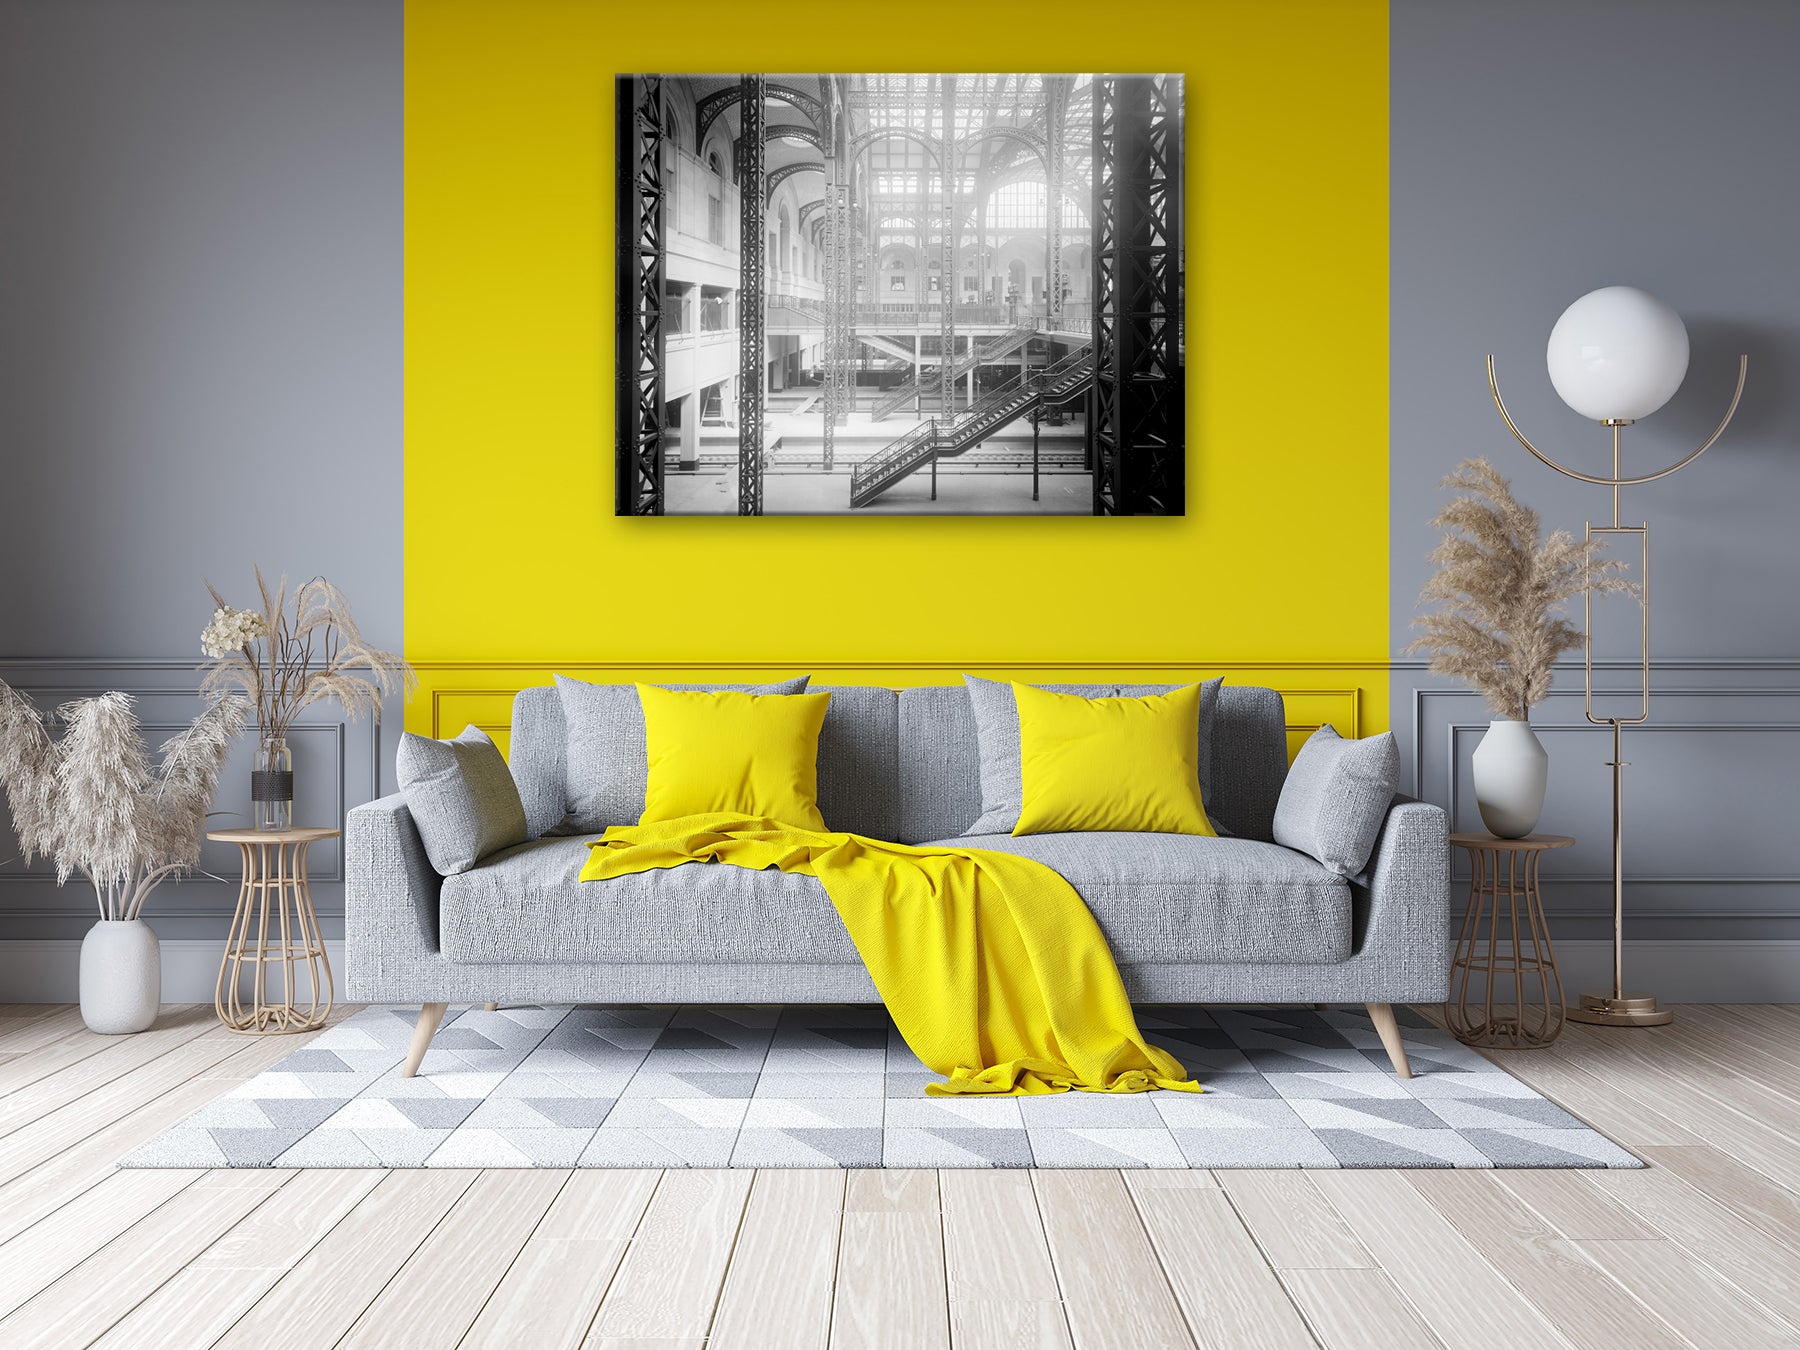 A canvas print of a vintage photo of Penn Station hanging in a living room with a yellow wall